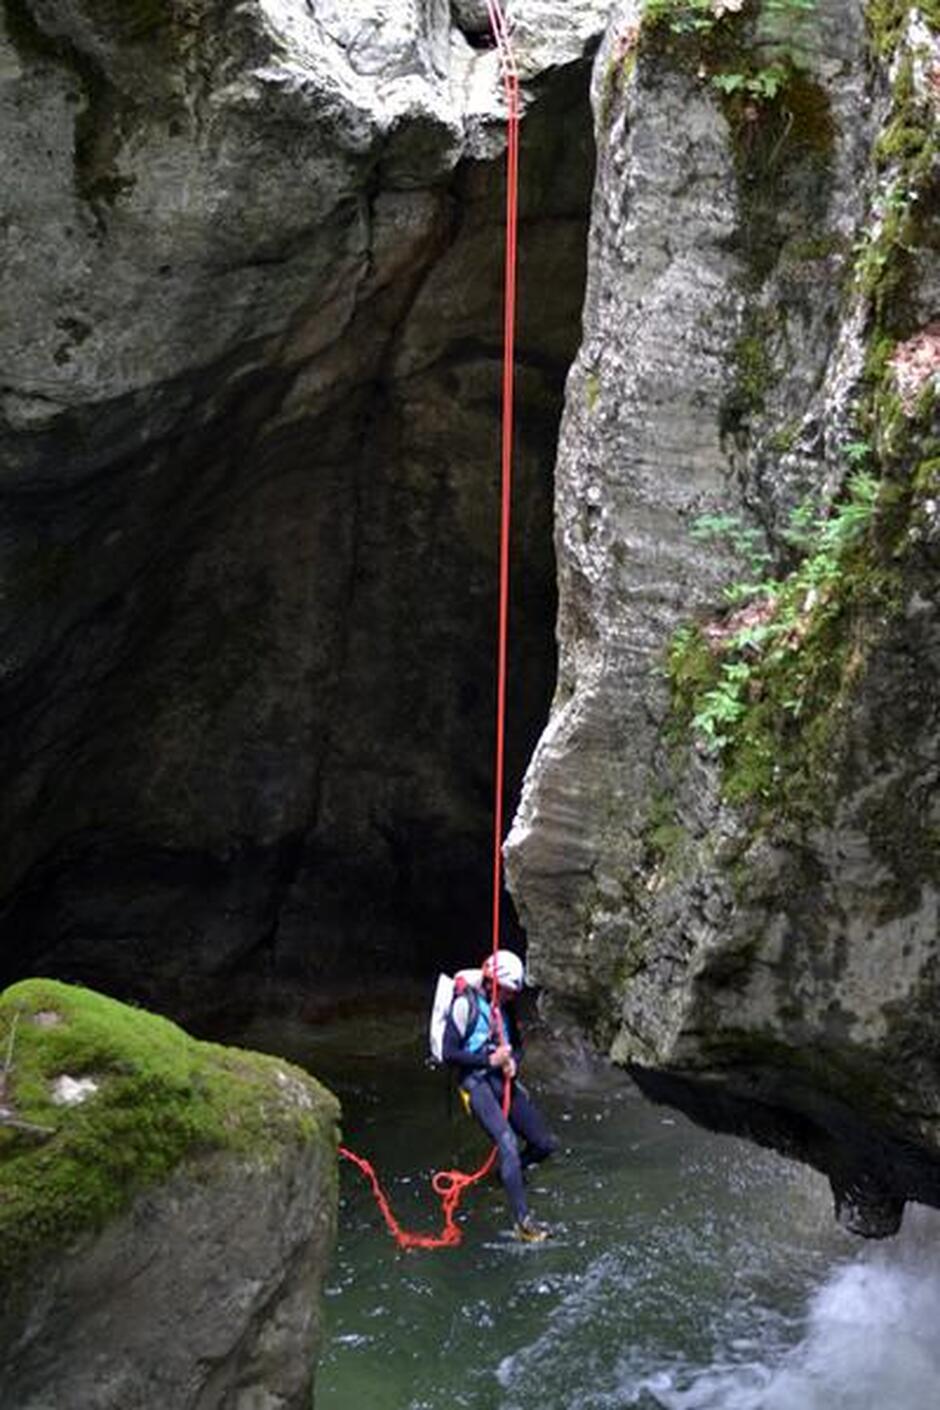 © Accompagnamento canyoning - Savoie Sport Nature